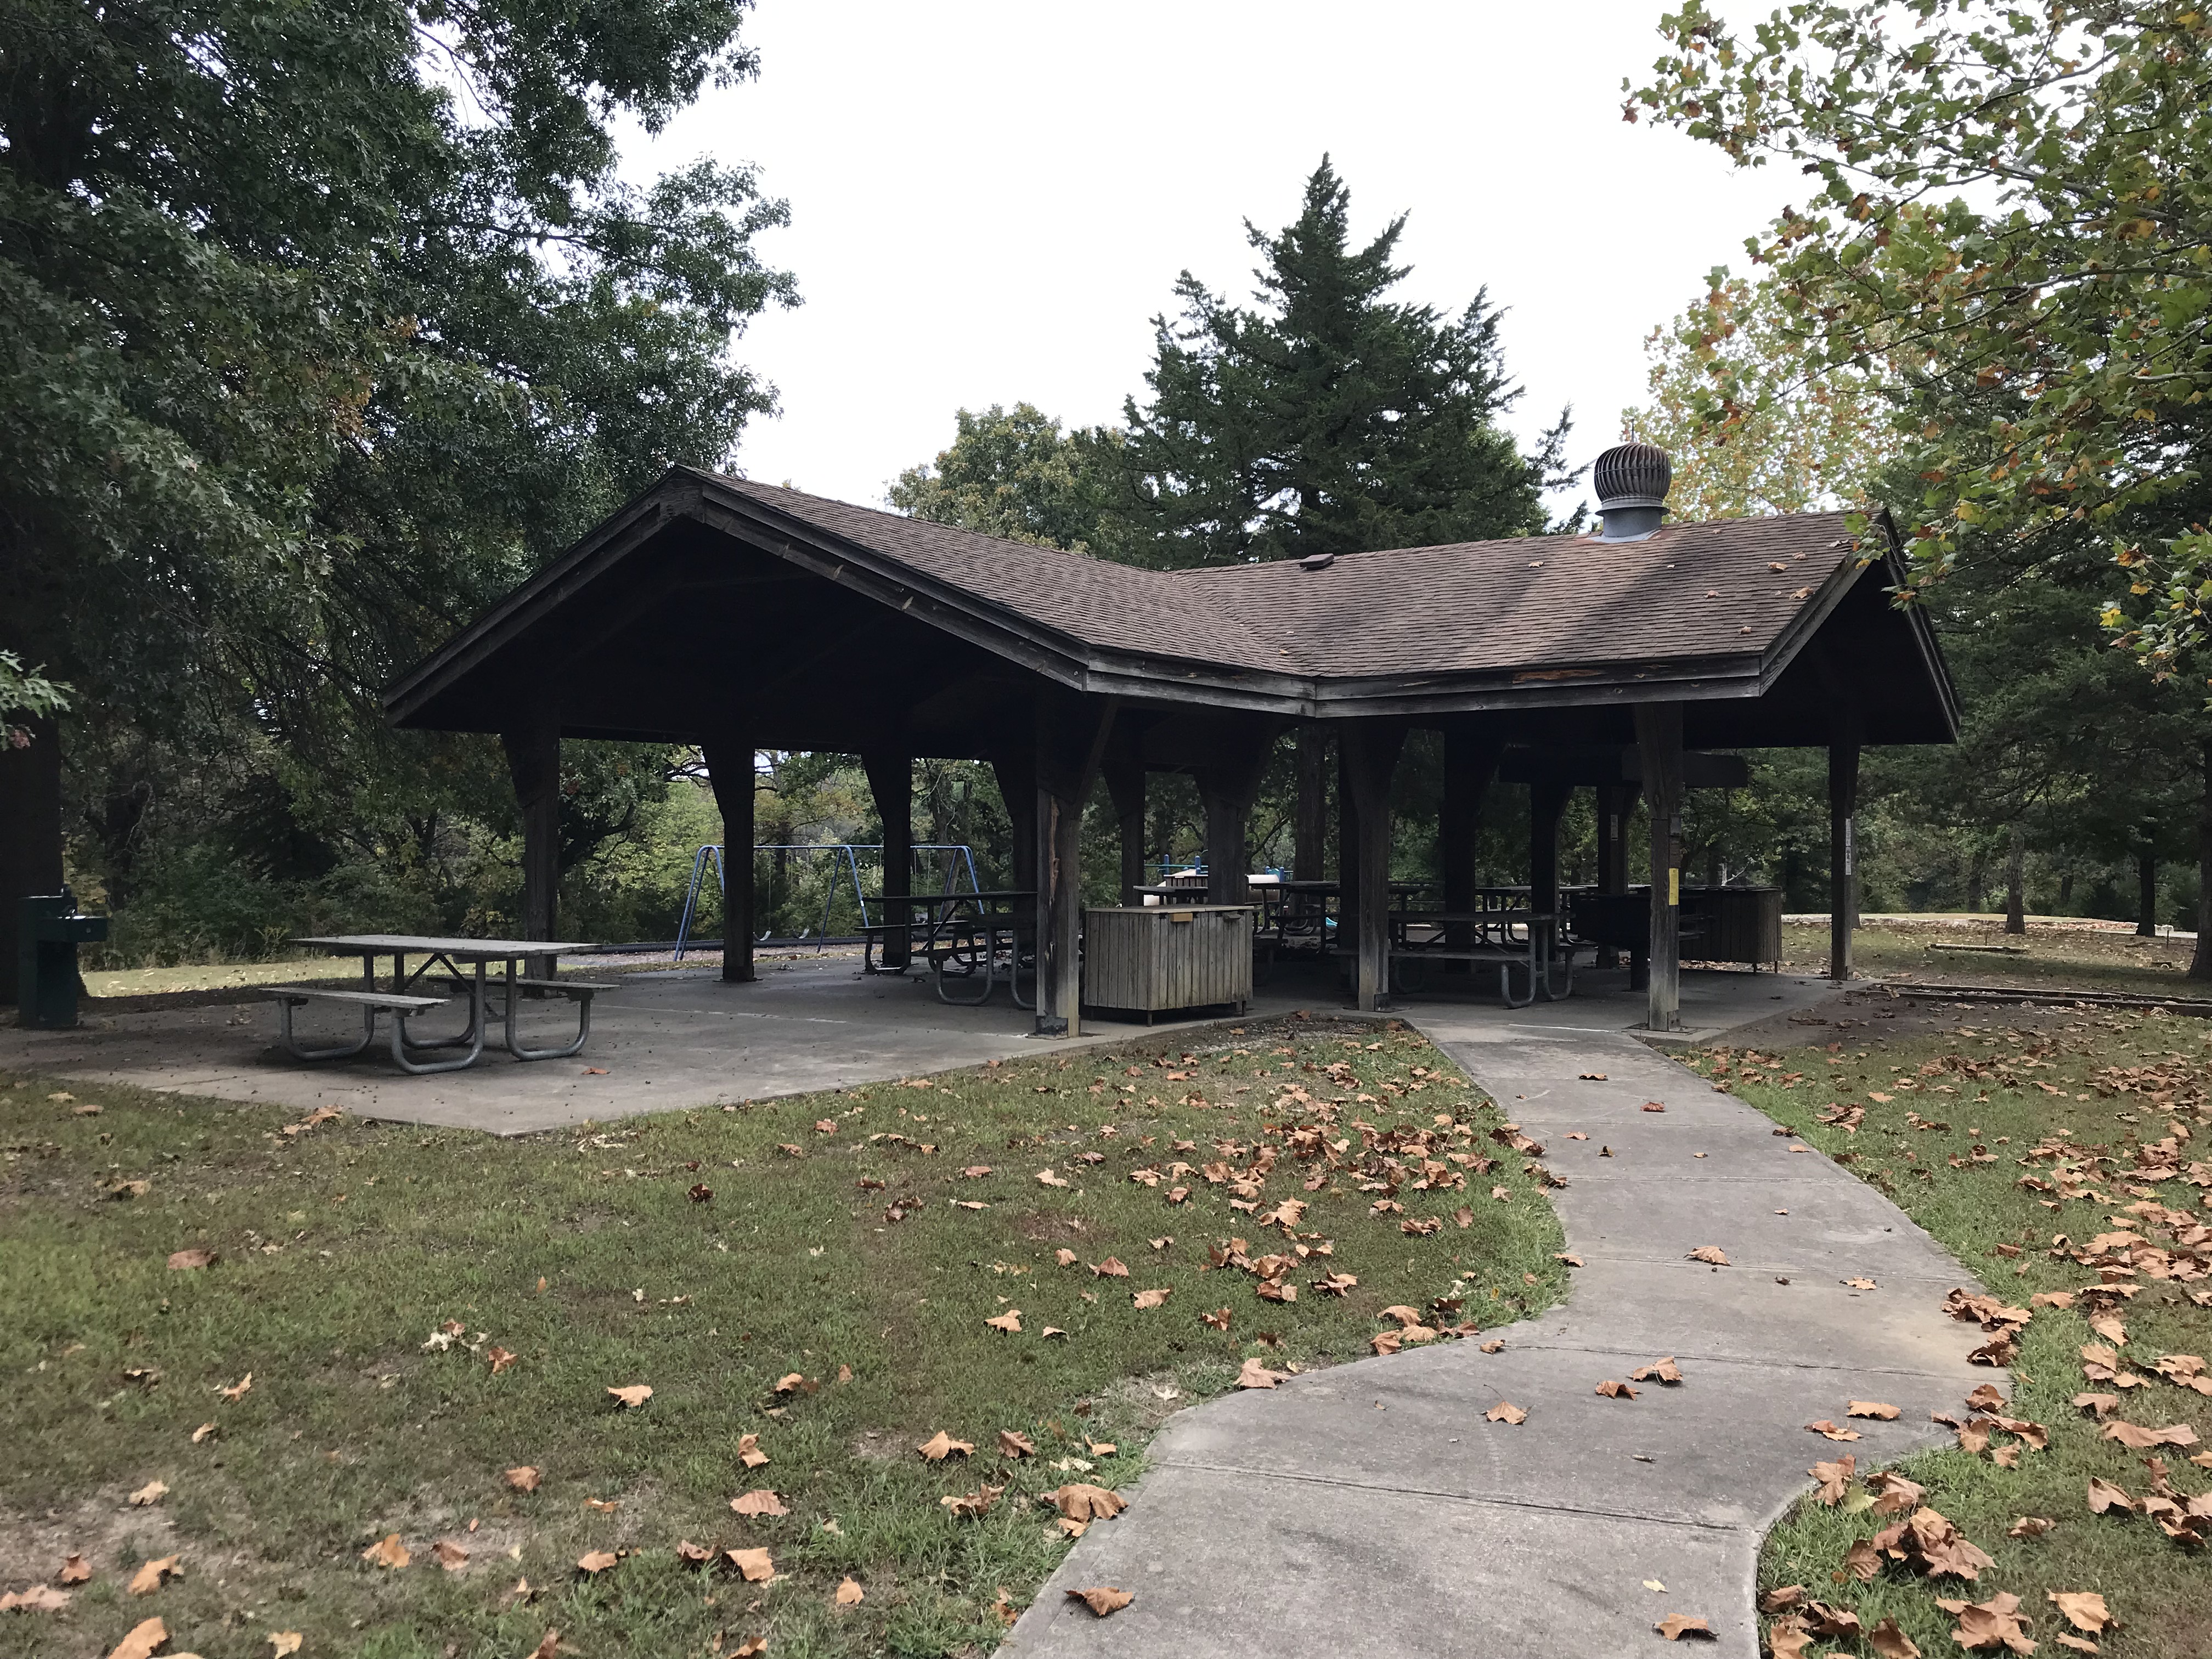 Picnic shelter and tables, with sidewalk leading to shelter